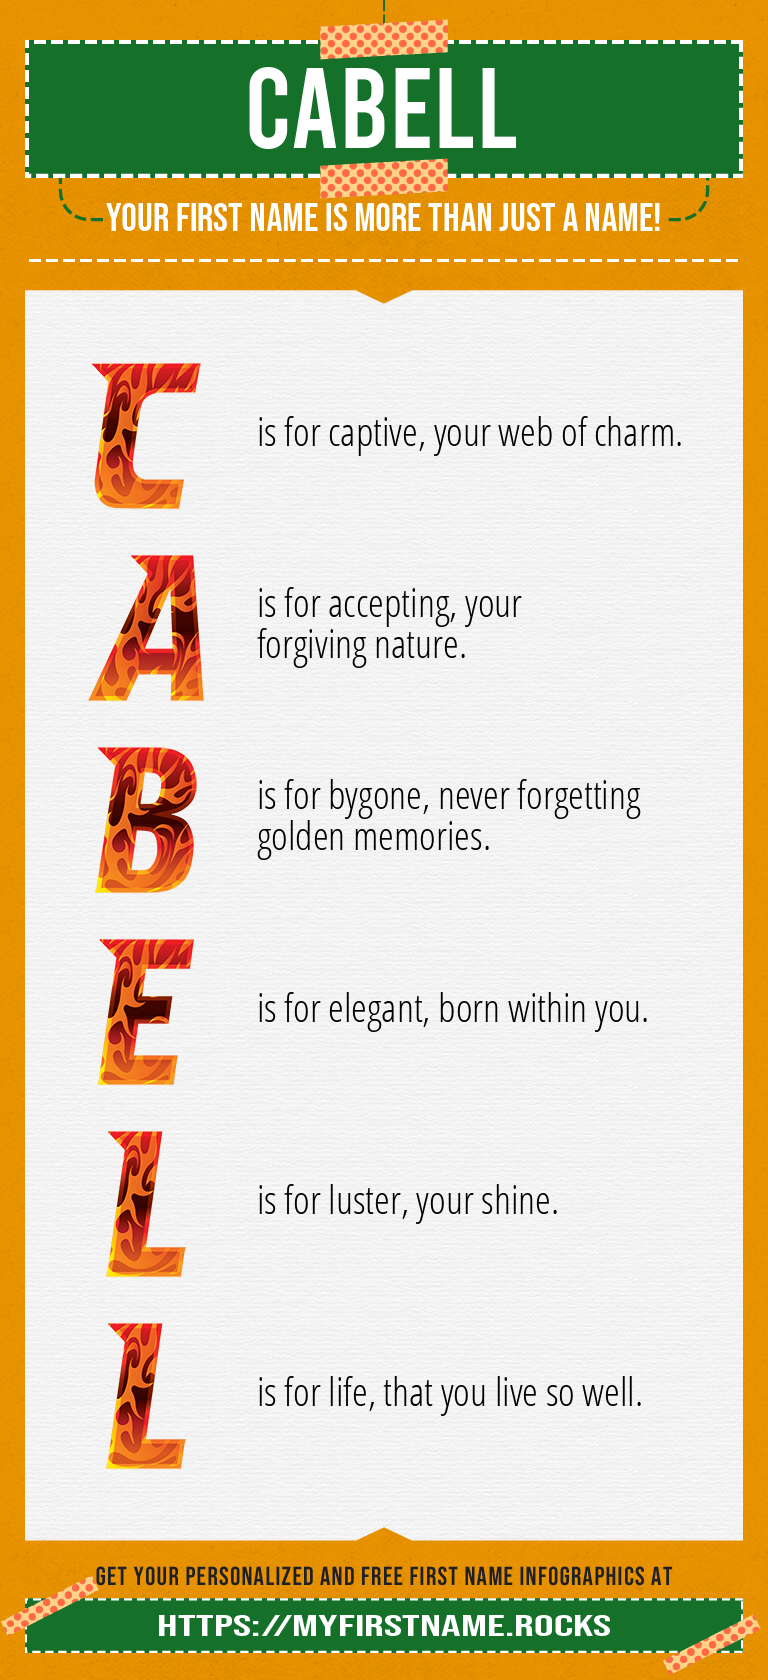 Cabell Infographics